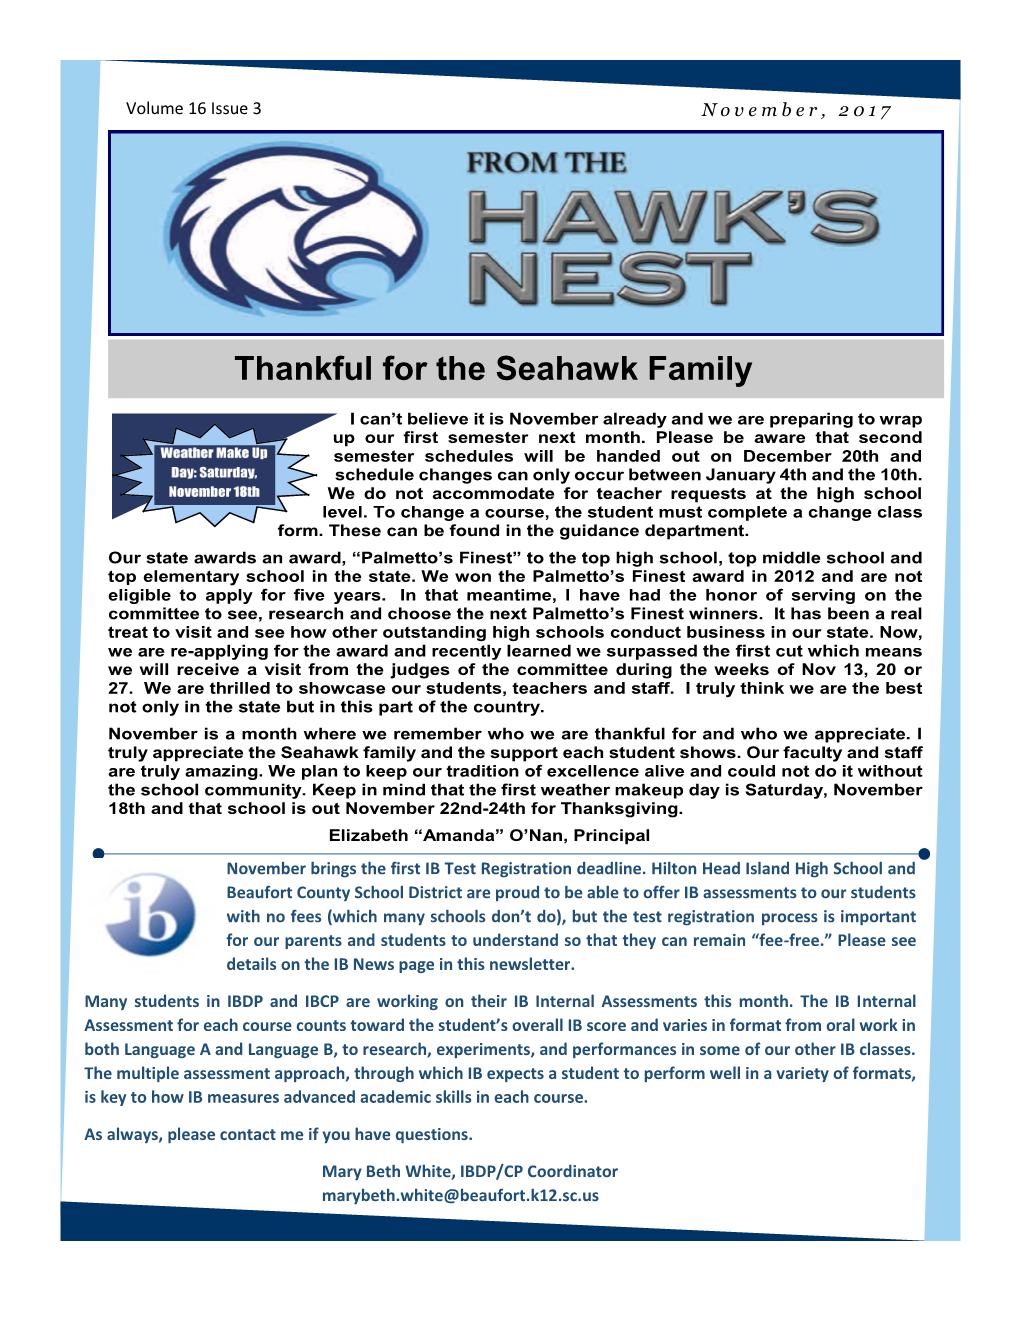 Thankful for the Seahawk Family